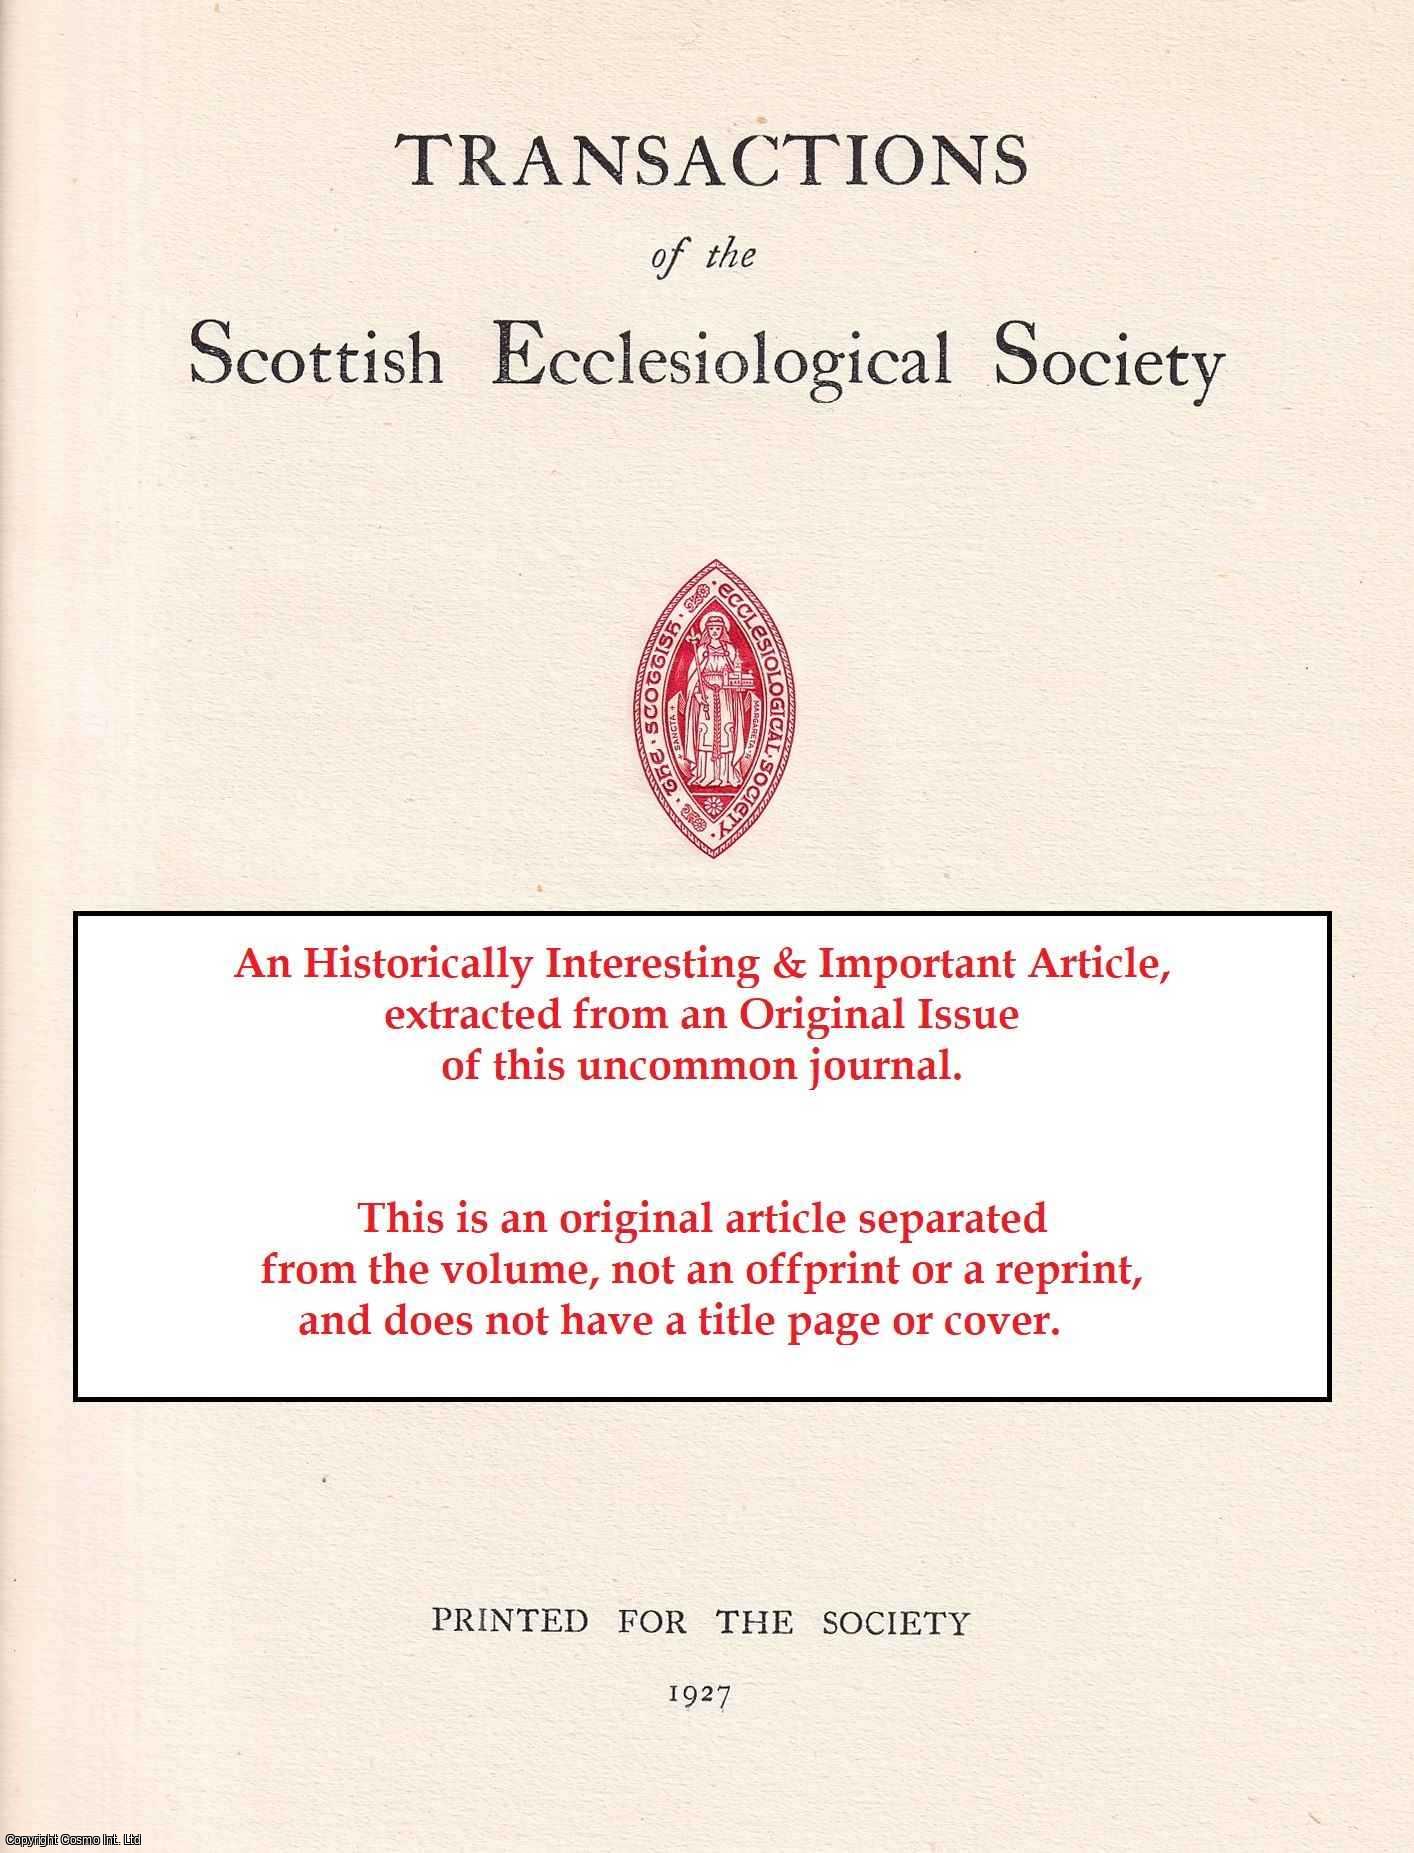 Rt Rev Kenneth Mackenzie - Some Churches of a West Highland Diocese, including Inveraray and Cumbrae. An original article from the Transactions of the Scottish Ecclesiological Society, 1920.